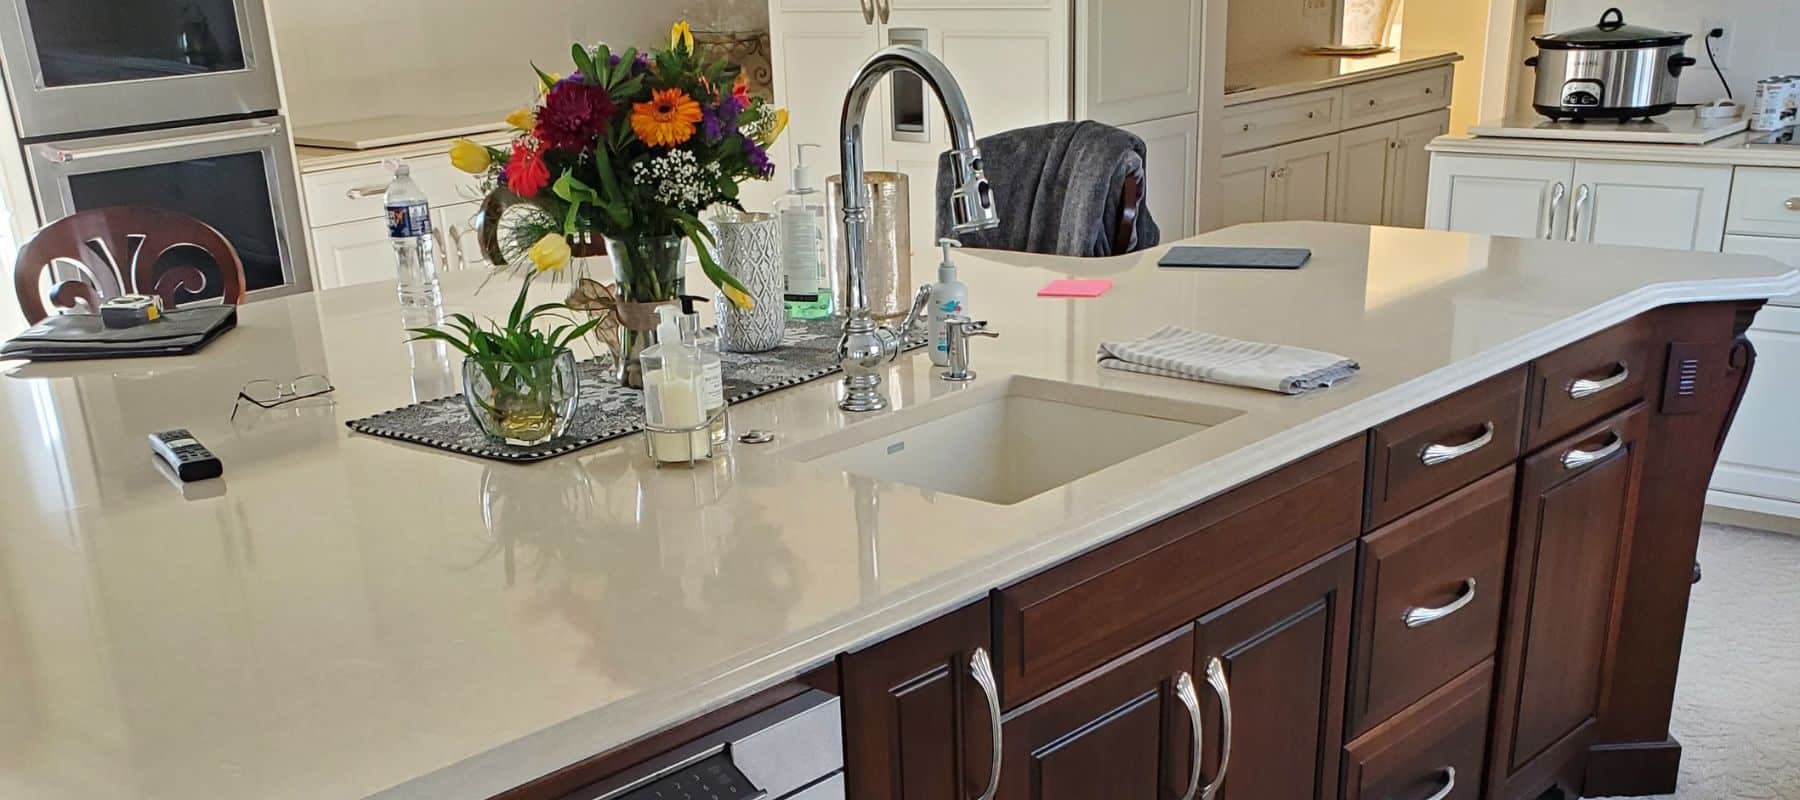 Kitchen island sink with things all over